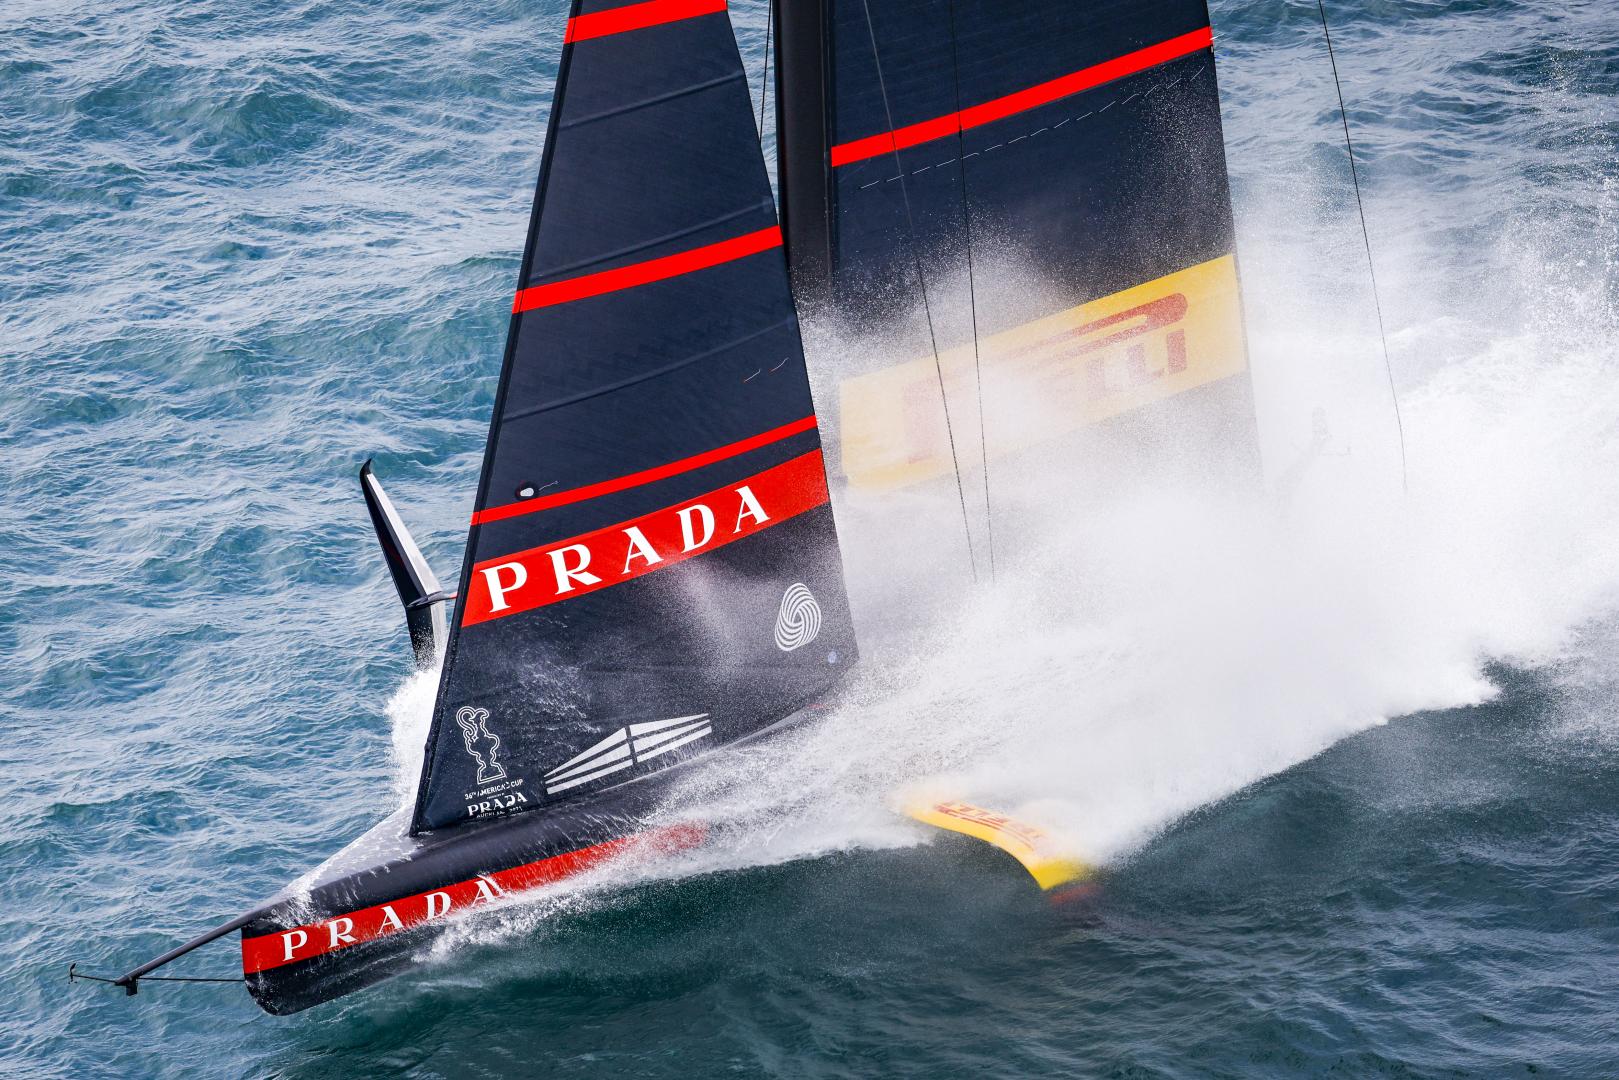 Prada Cup 2021: it will be a great Saturday for Auckland